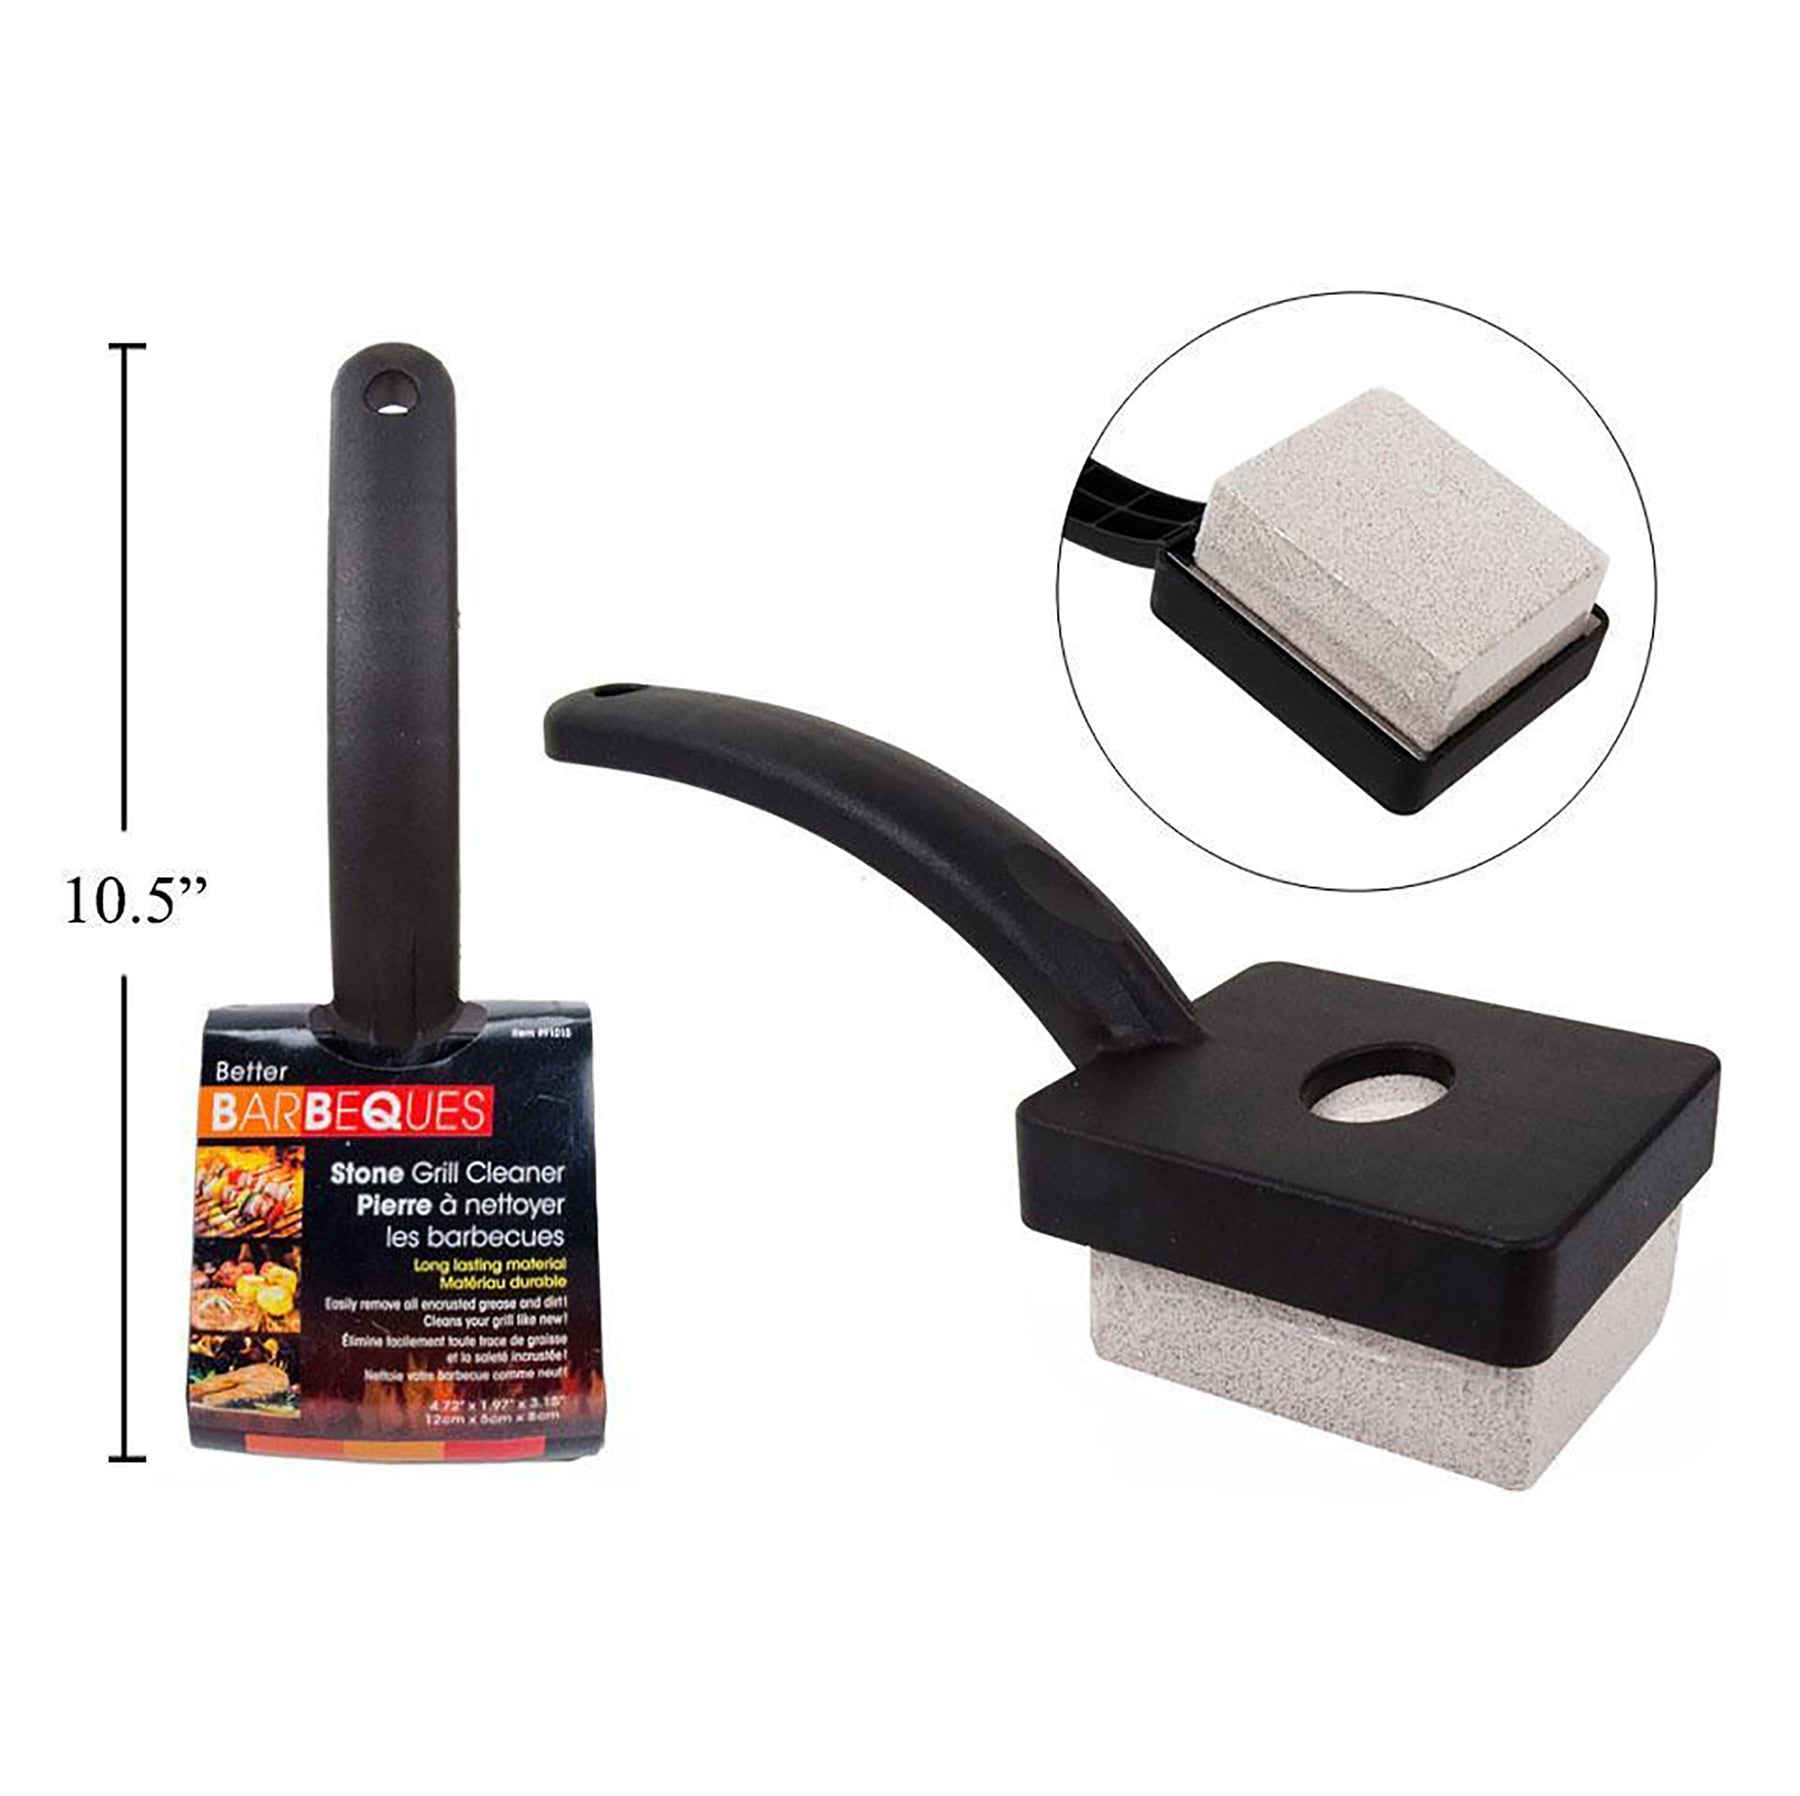 BBQ Stone Grill Cleaner with Curved Handle 10.5in